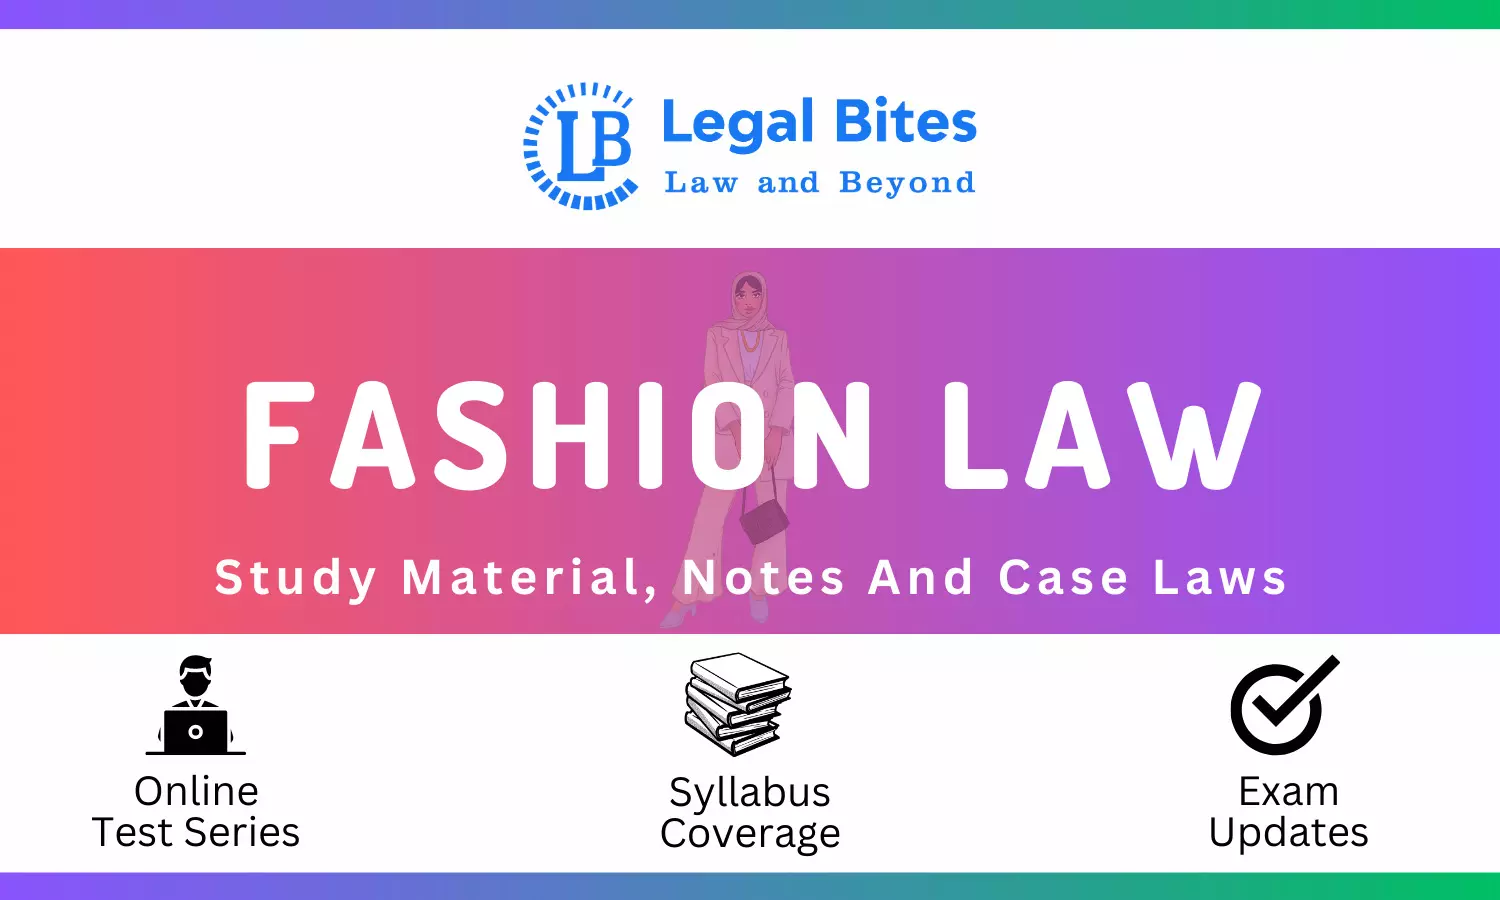 Fashion Law - Notes, Case Laws And Study Material